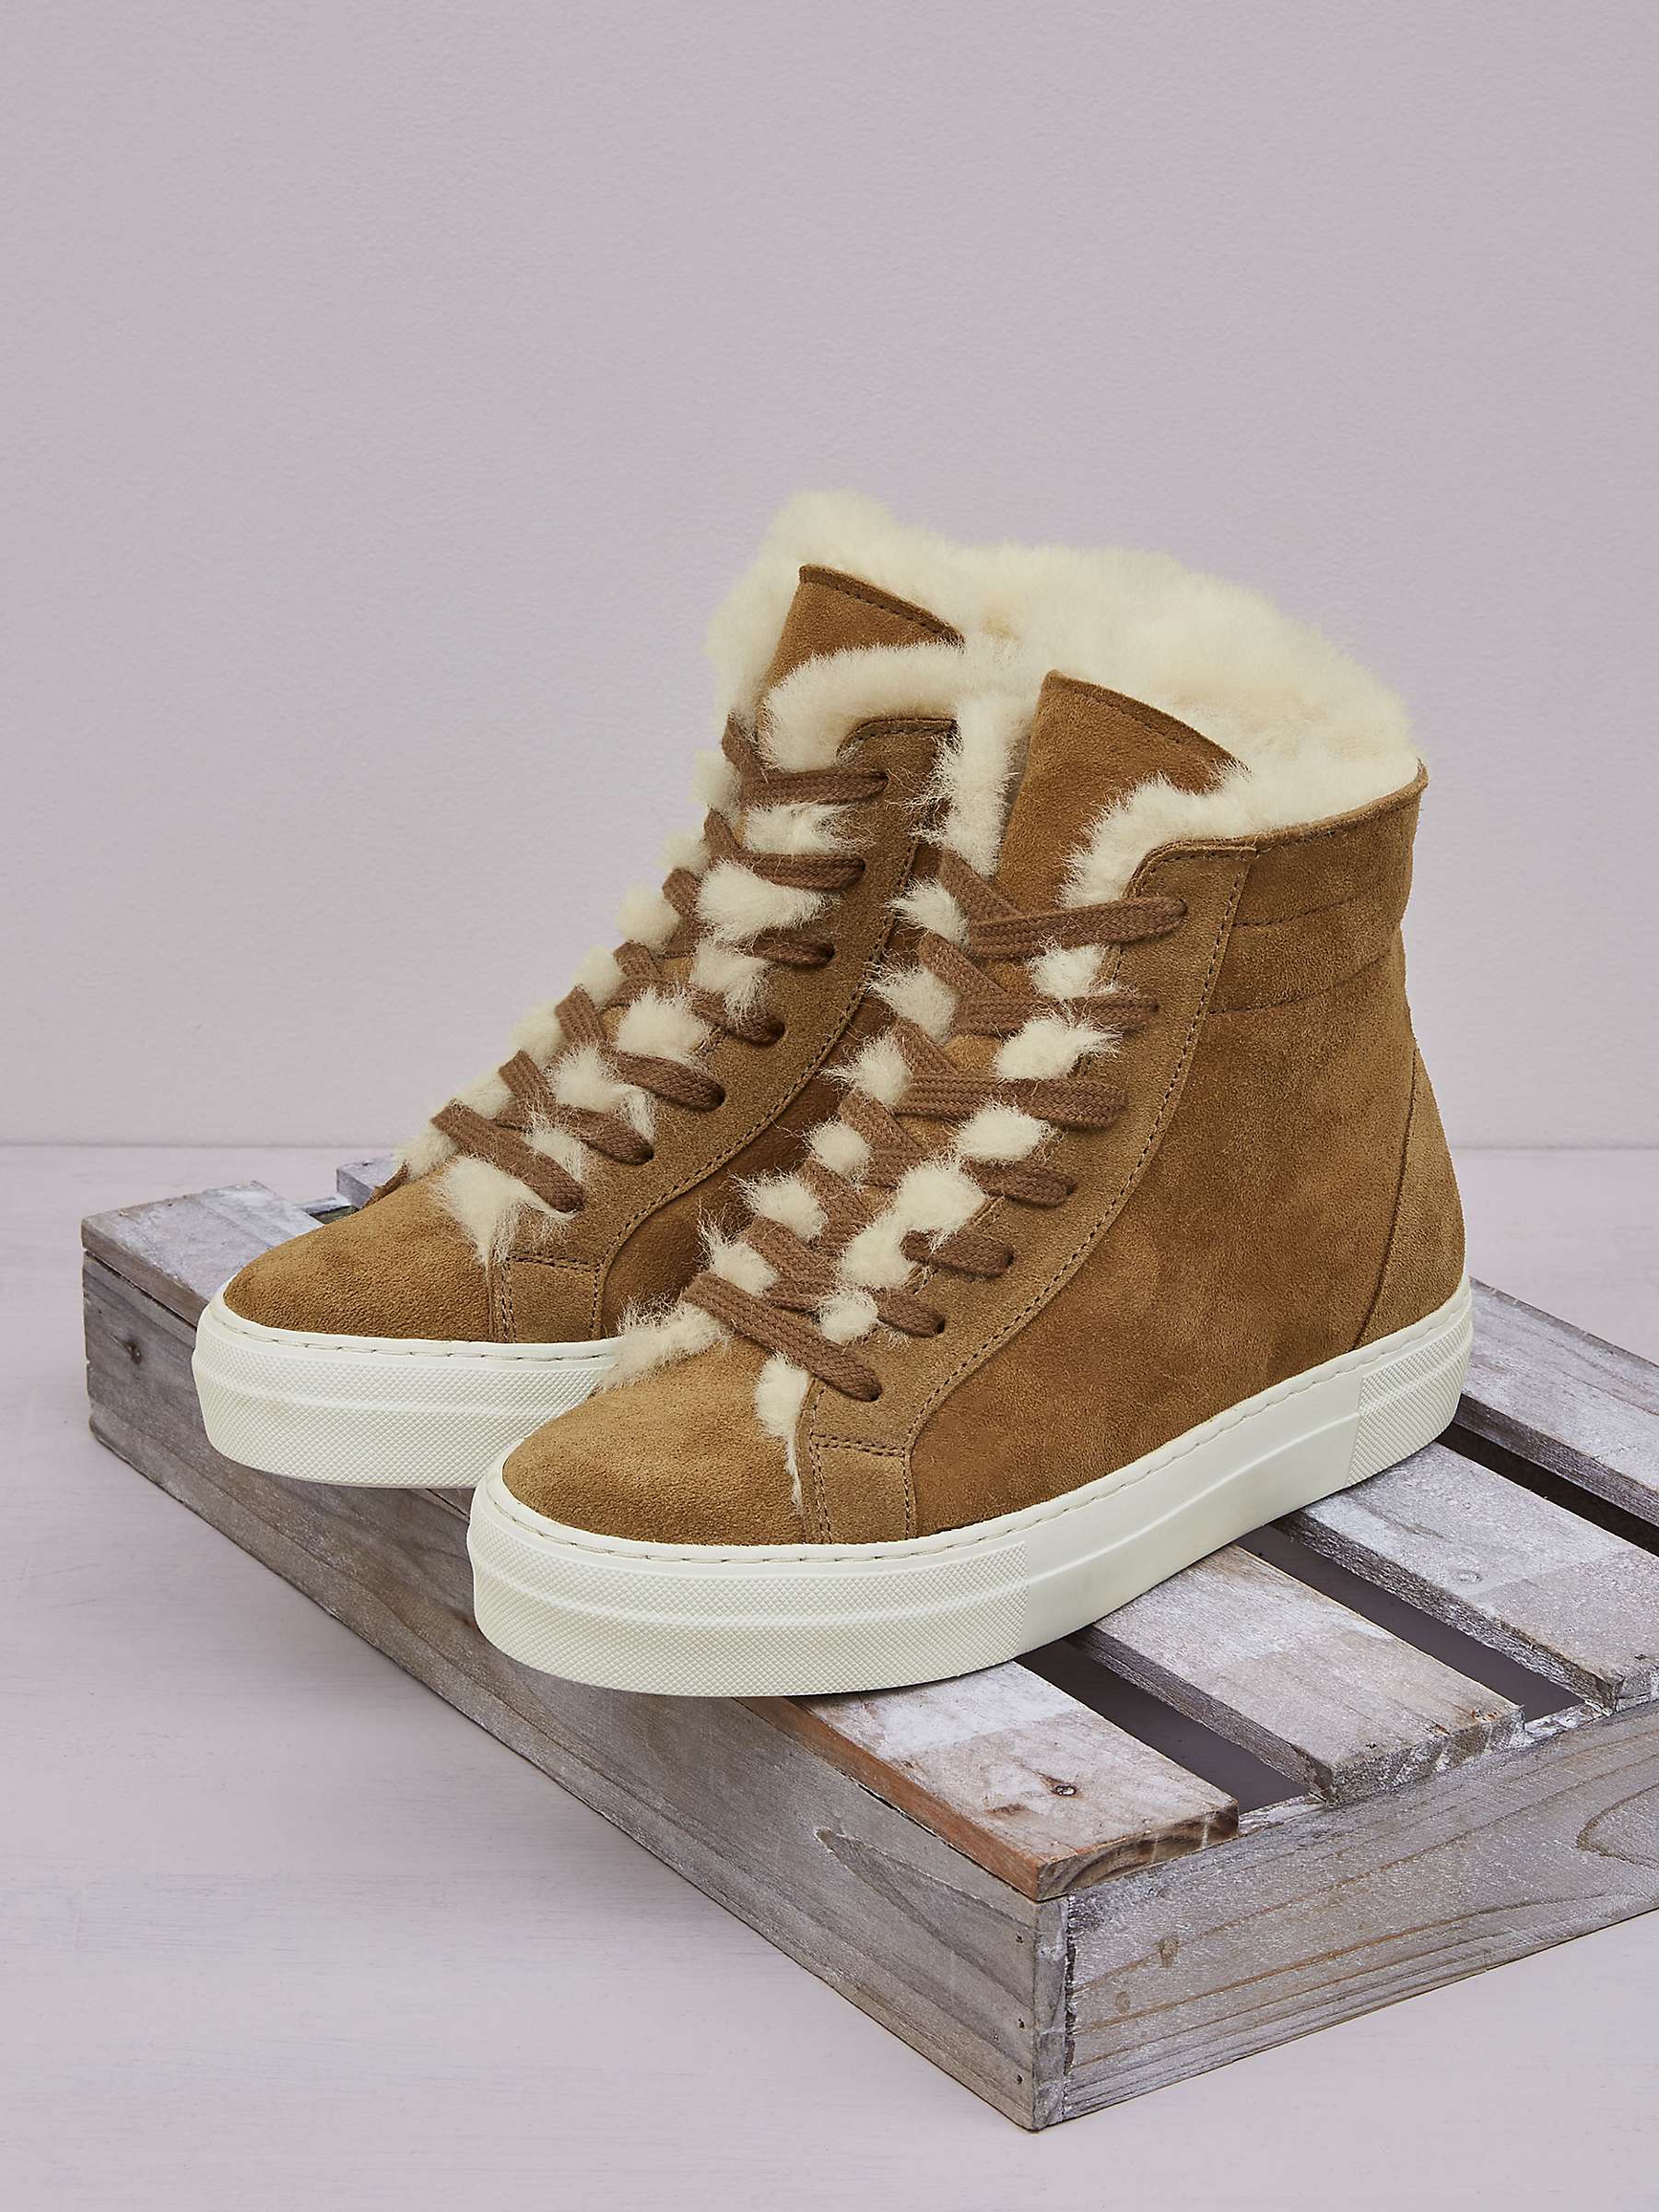 Buy Celtic & Co. Sheepskin High Top Trainers, Whisky Online at johnlewis.com